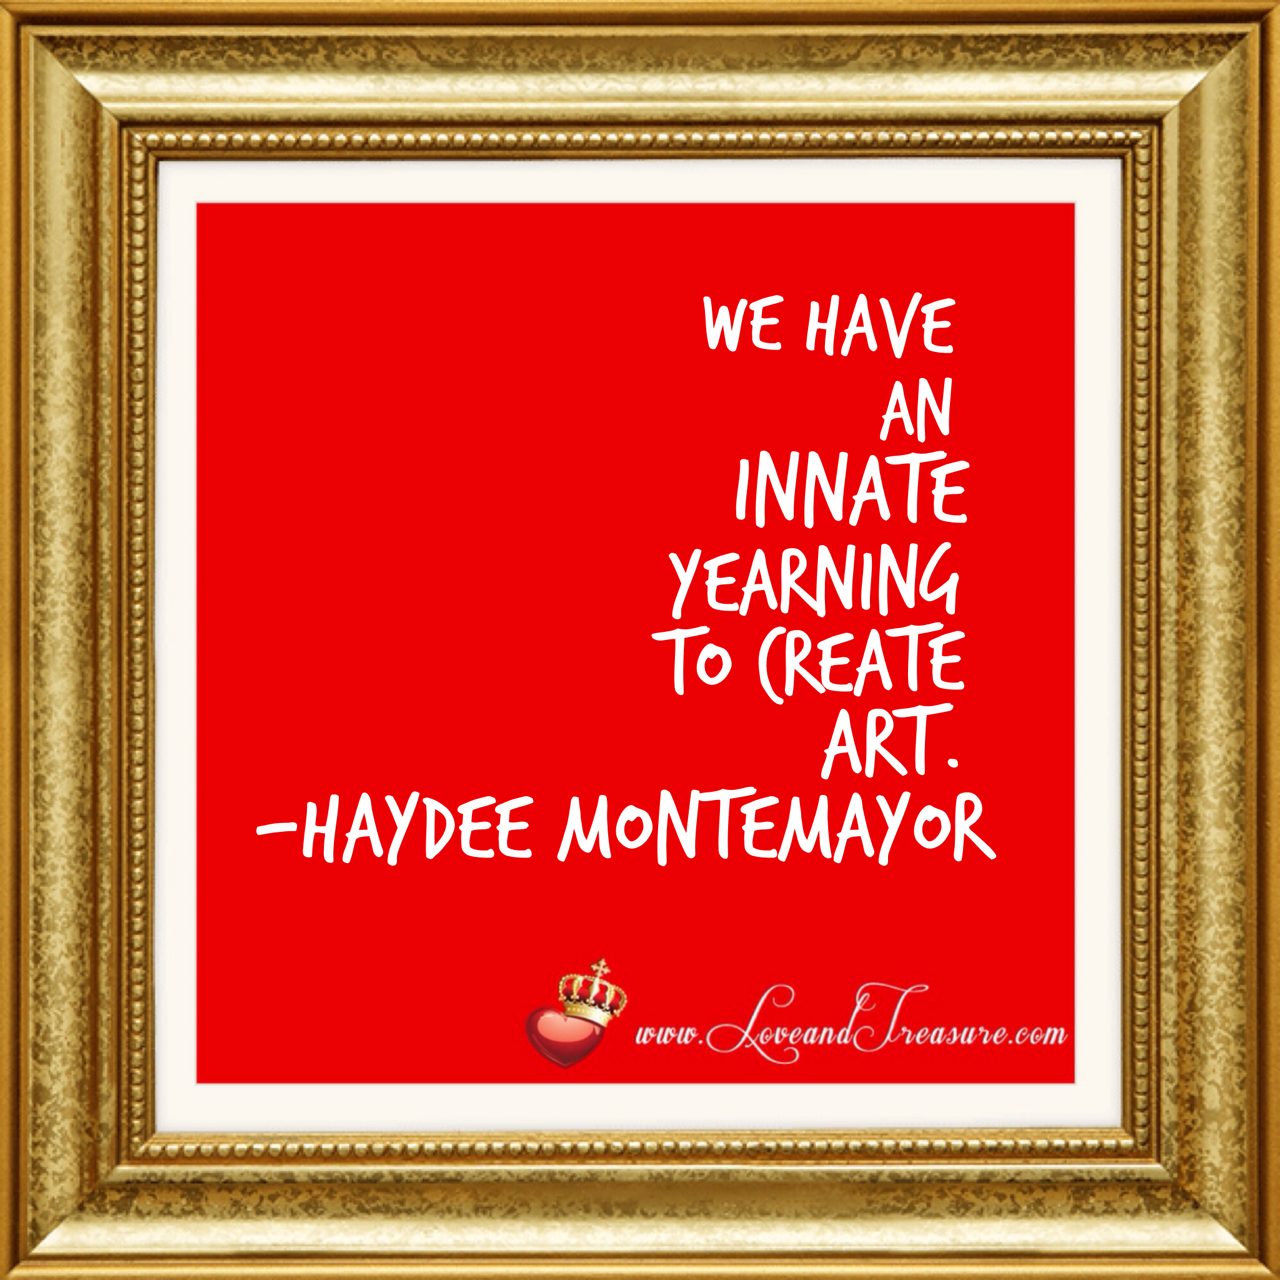 We all have an innate yearning to create art by Haydee Montemayor from Love and Treasure www.loveandtreasure.com